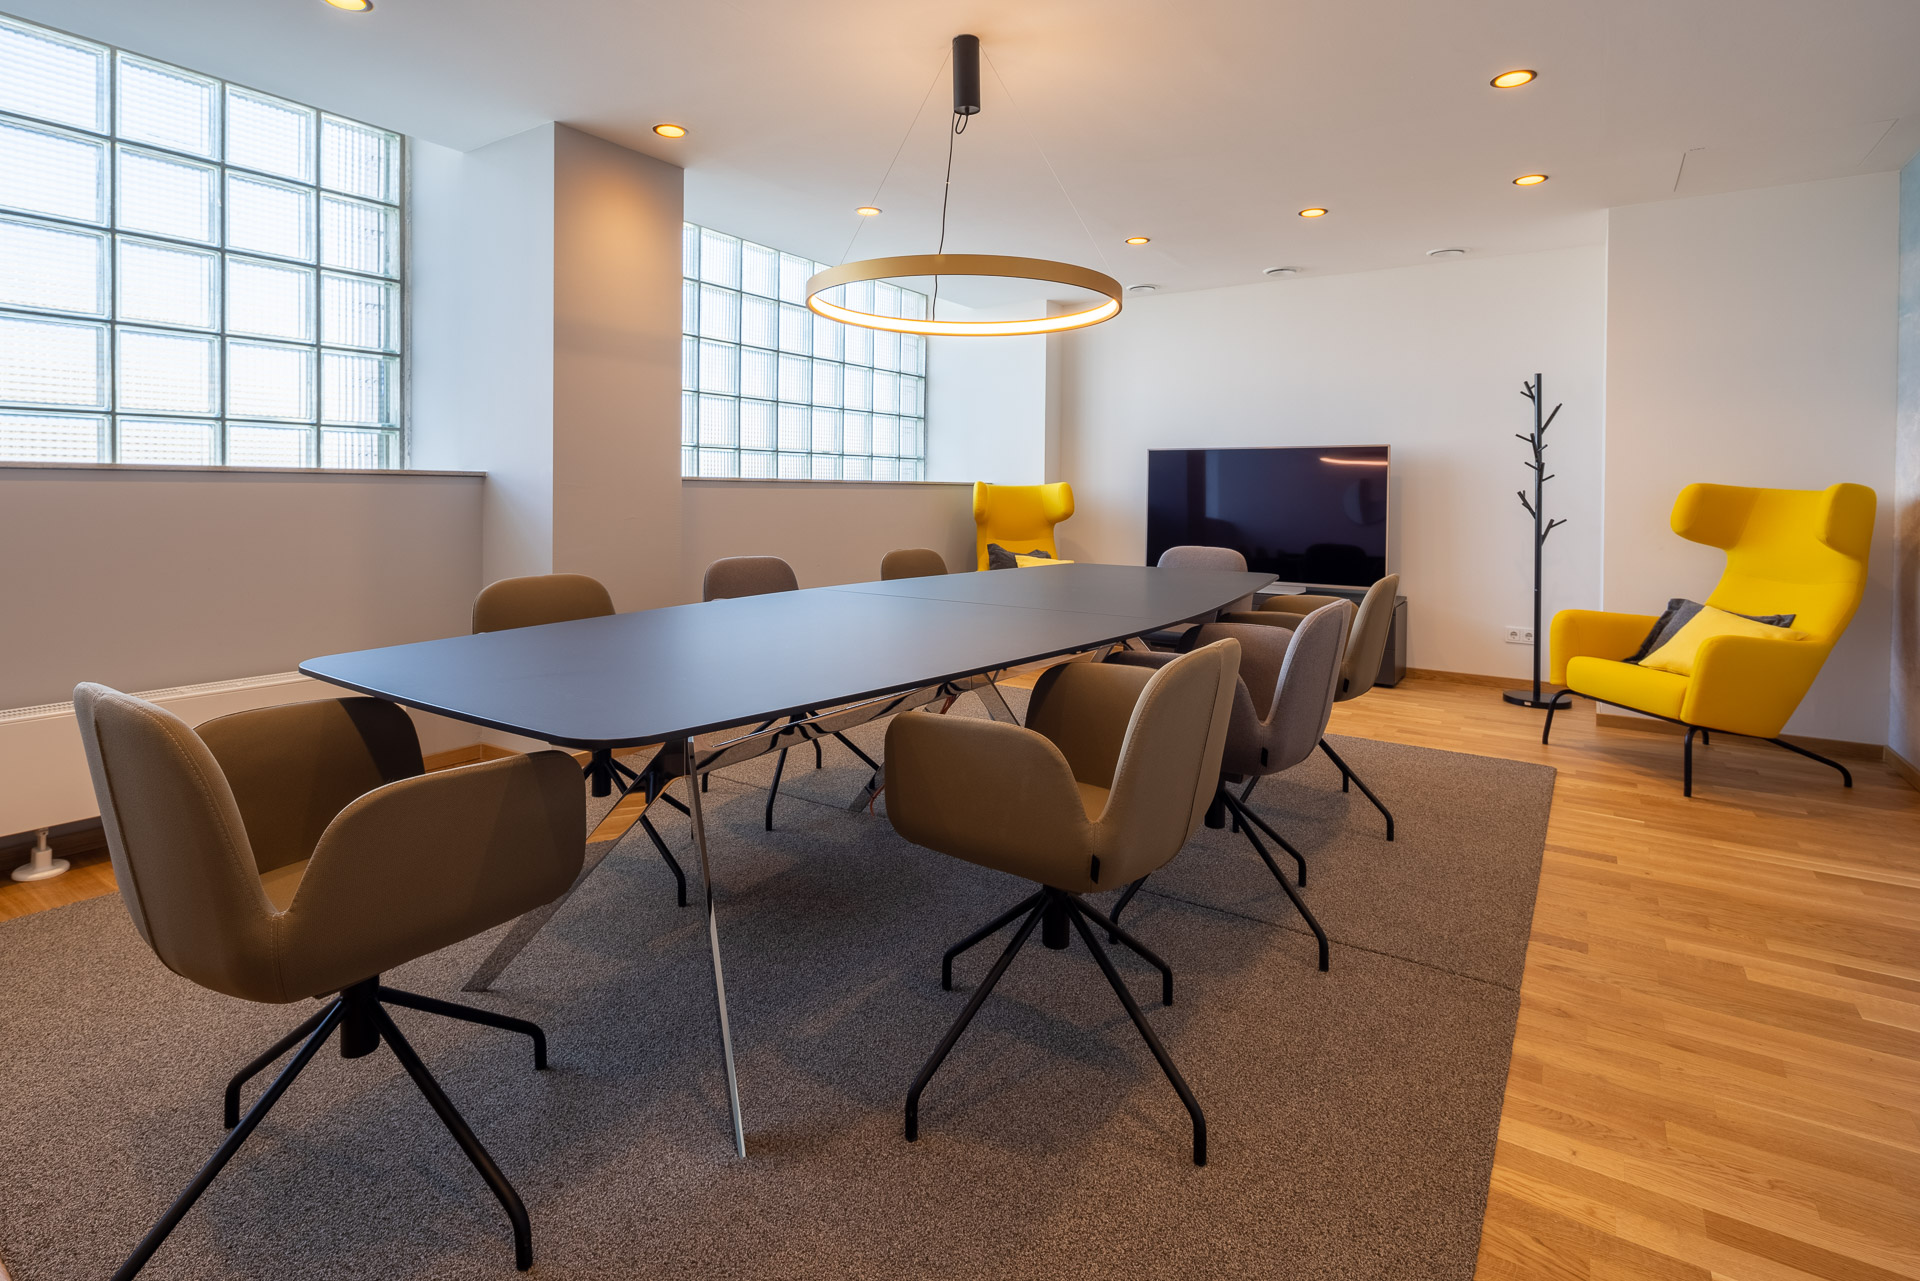 Insight into a modernly designed meeting room with a large table and comfortable seating at JOYN Cologne.